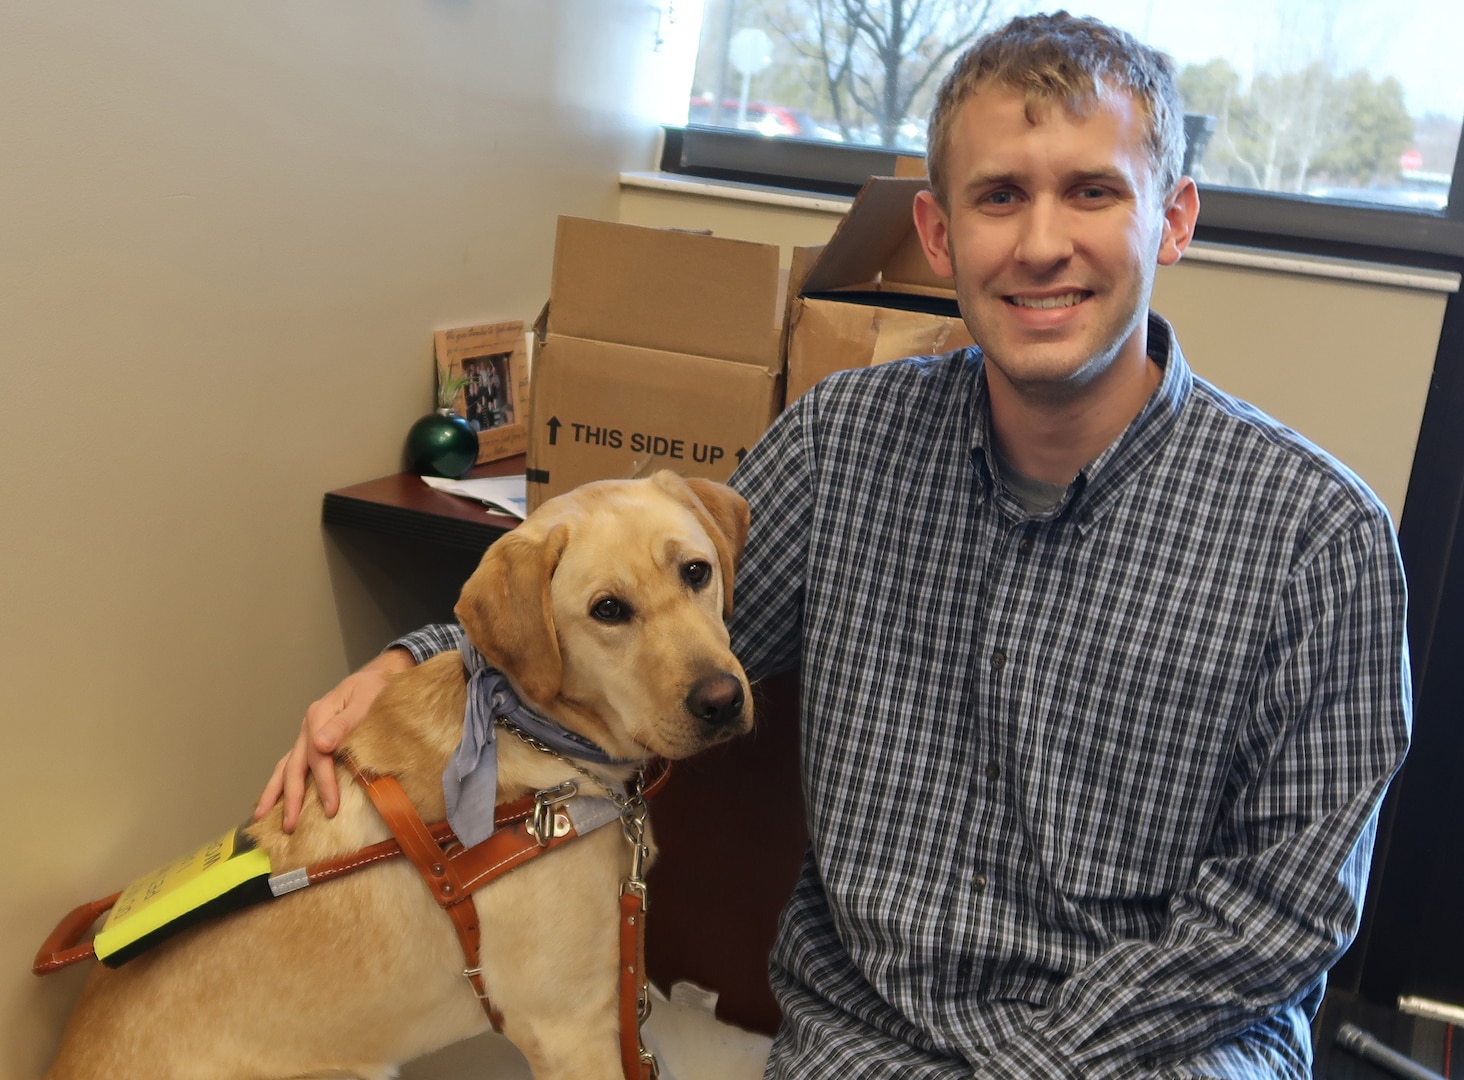 Man’s best friend: Distribution employee’s daily life enhanced by guide dog